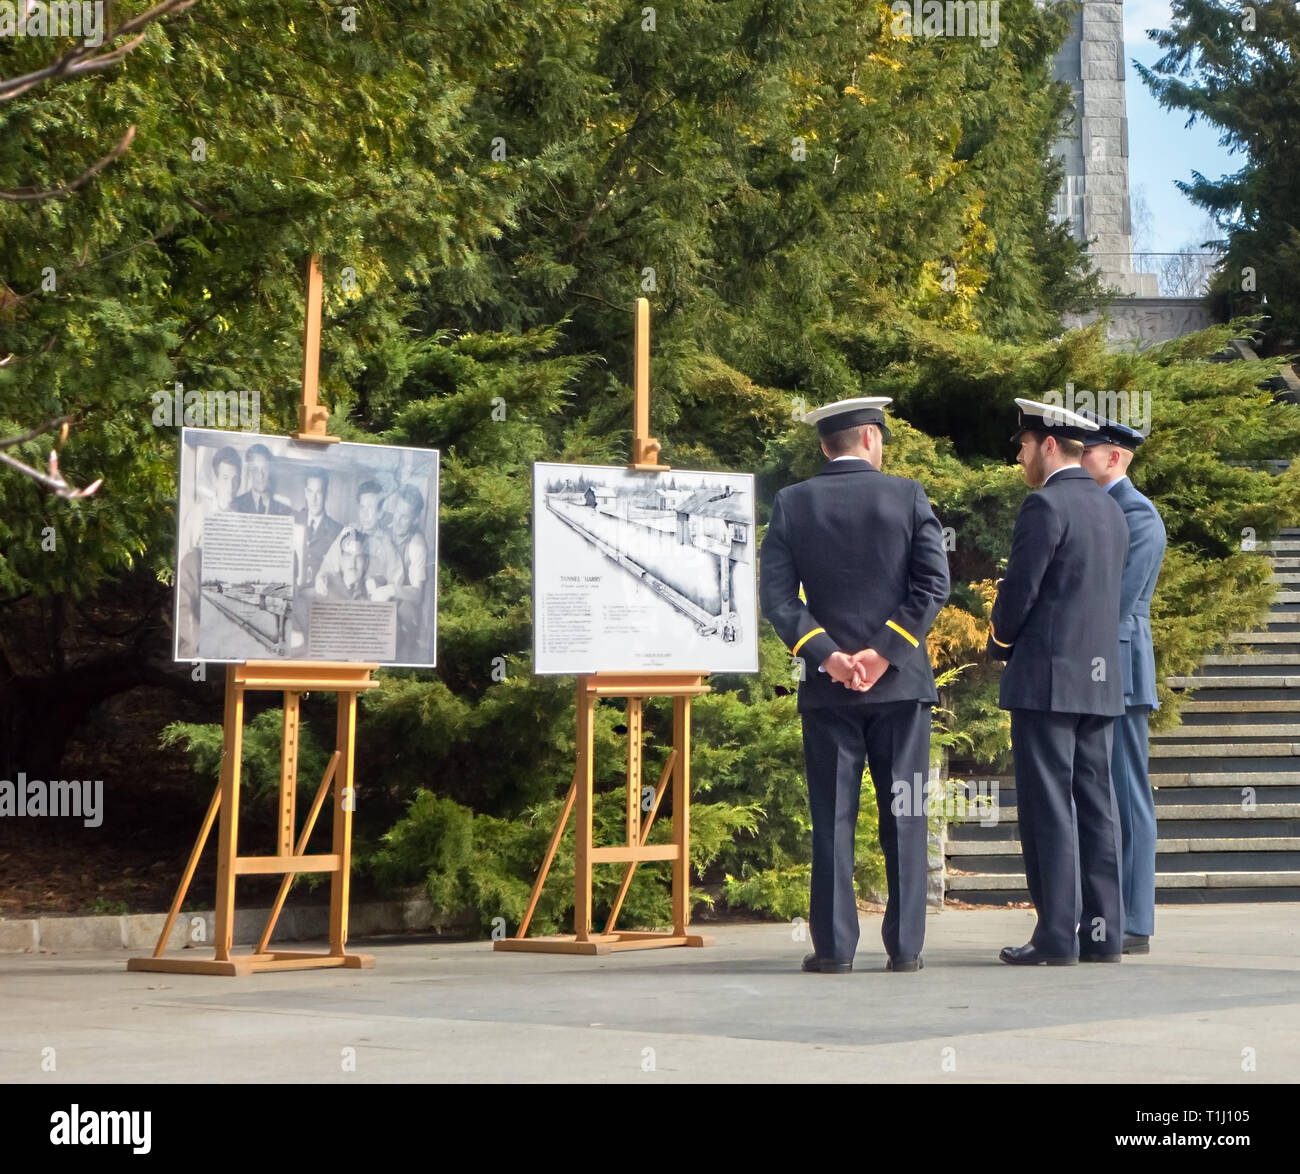 Royal air force police  pay tribute to the 50 airmen killed in the great escape from Stalag 3 on the 75th anniversary at the war cemetery at Poznan Stock Photo